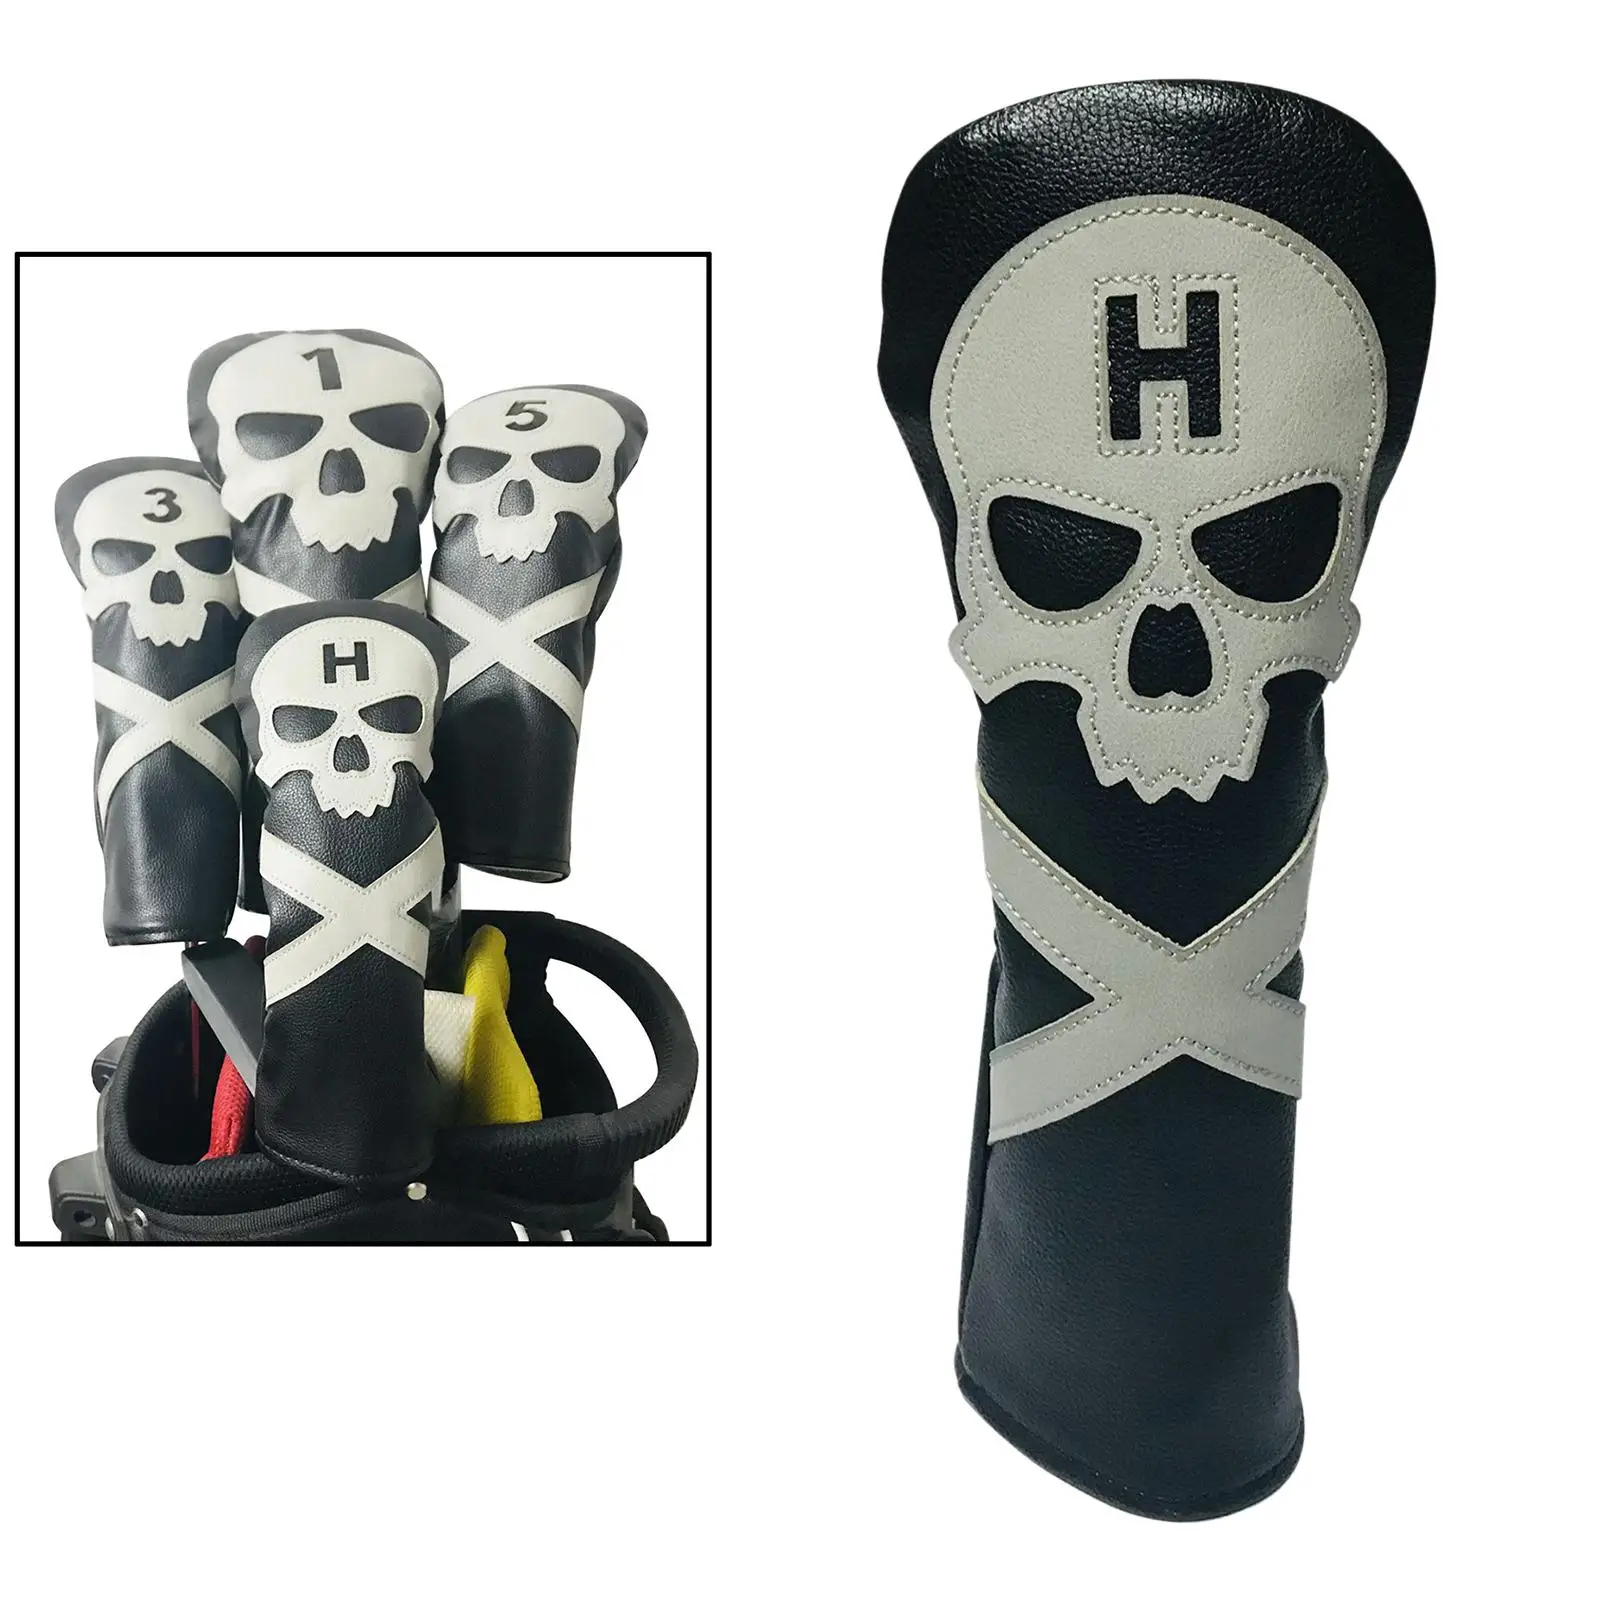 Waterproof PU Leather Golf Headcover  3 5 UT Wood Fairways Driver Hybrid Head  with No. Tag, Golf Accessories